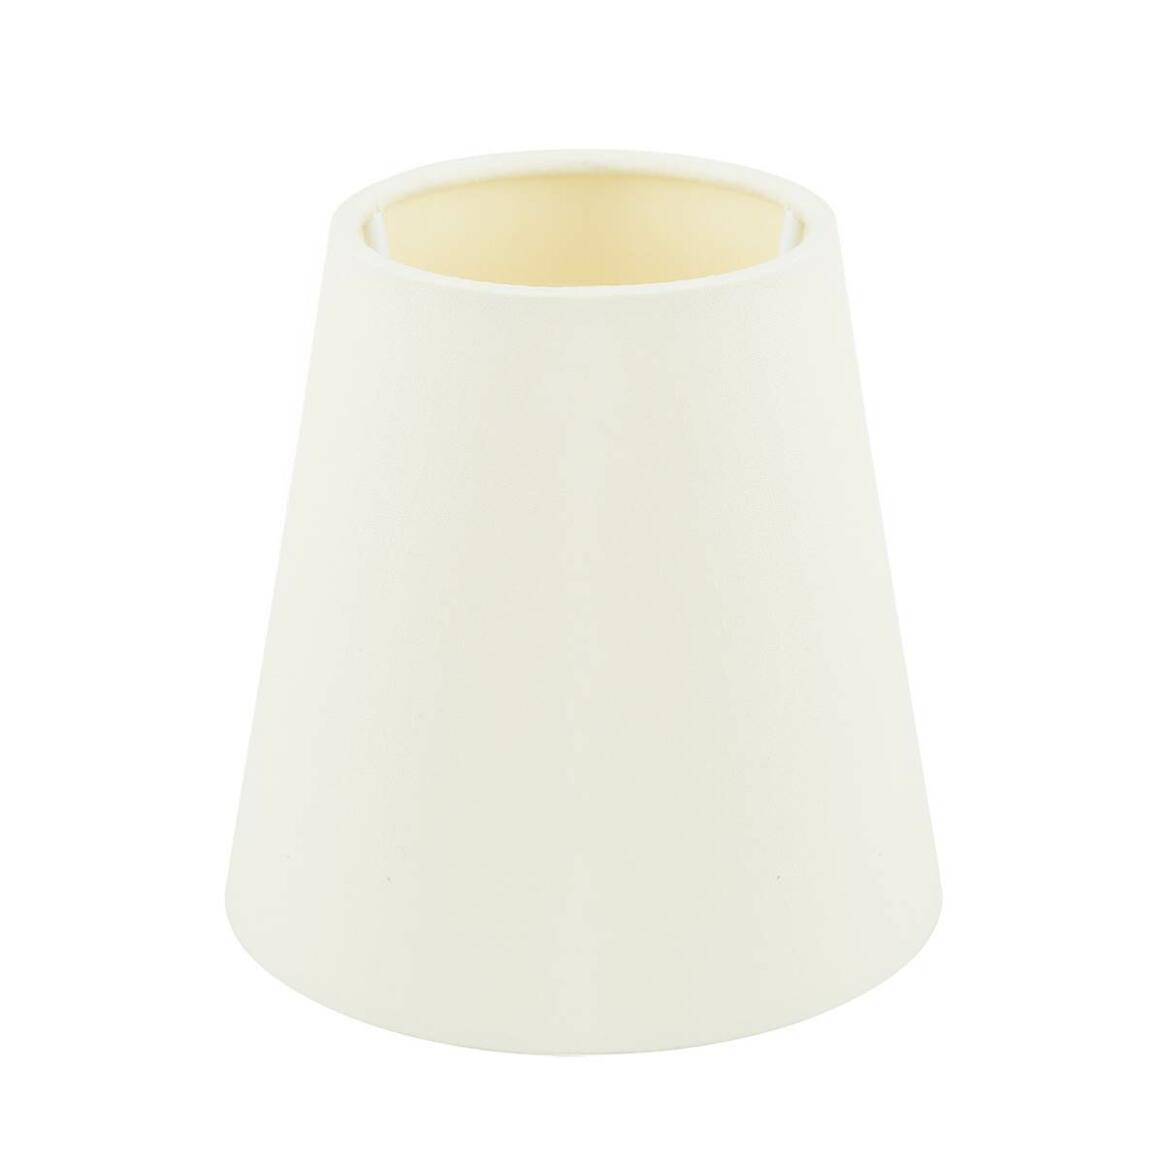 Carrick Contemporary Wall Light with Small Fabric Shade